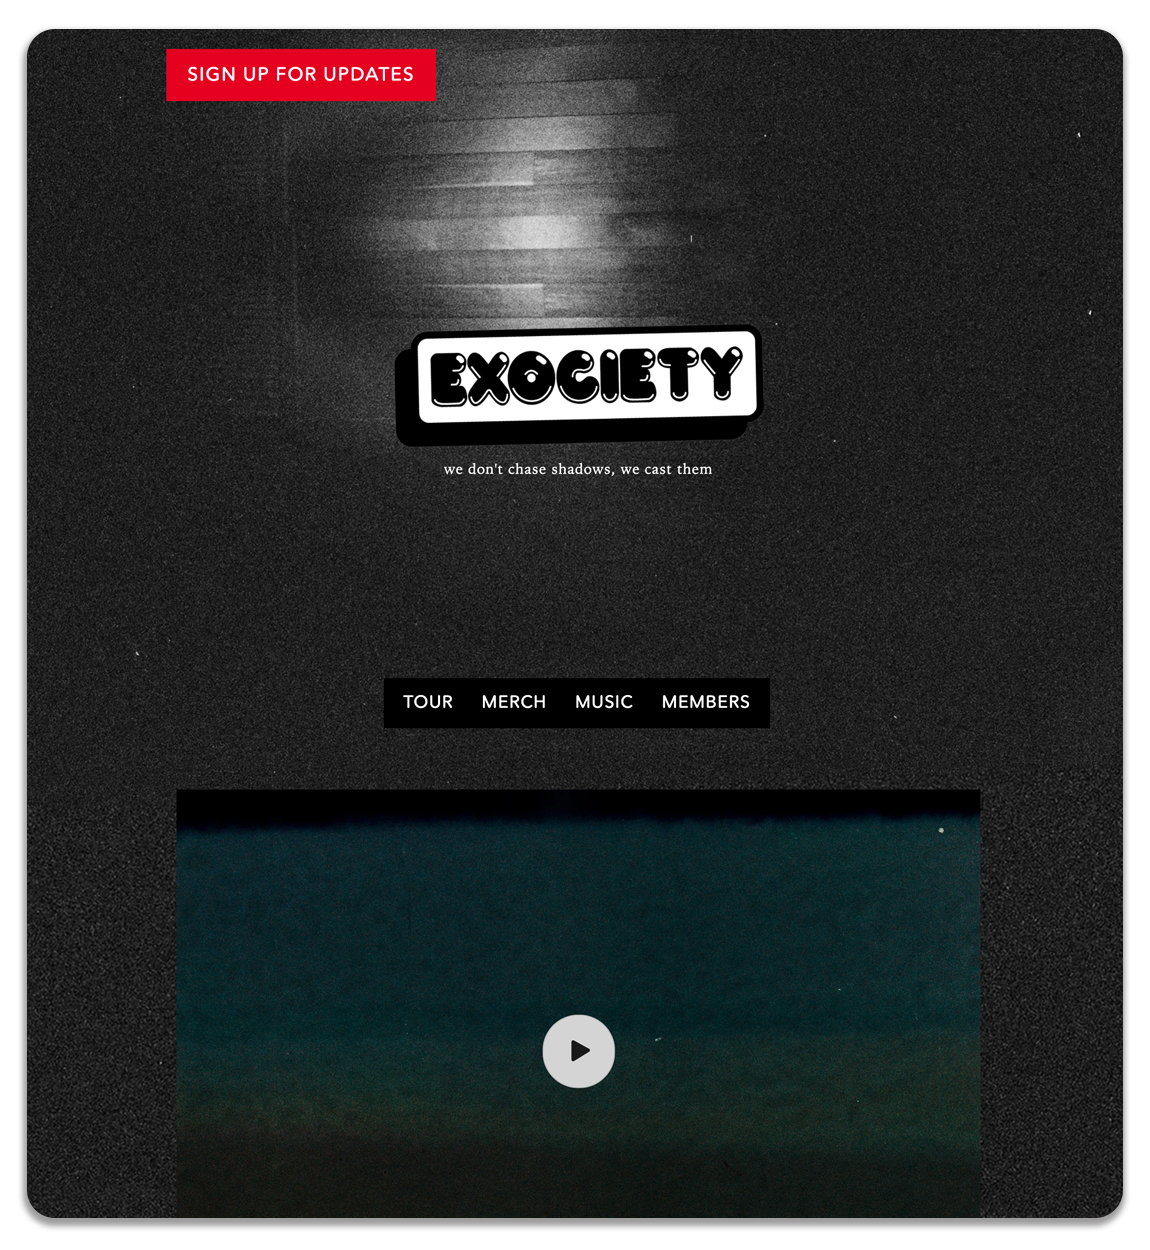 excociety: Website Relaunch